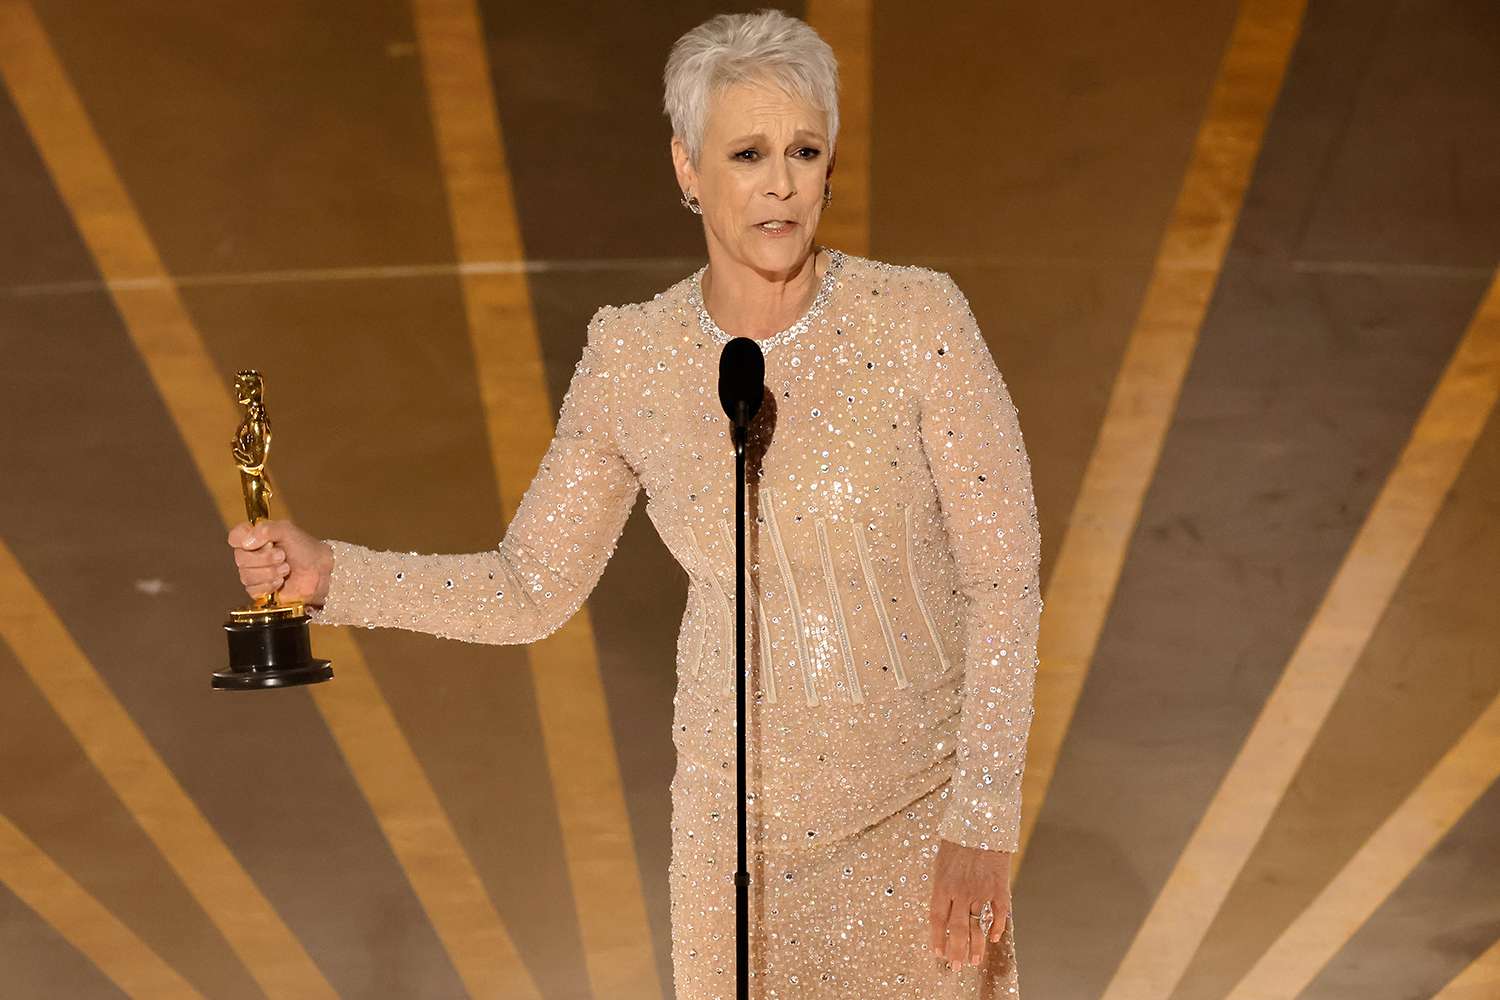 Jamie Lee Curtis accepts the Best Supporting Actress for "Everything Everywhere All at Once" onstage during the 95th Annual Academy Awards at Dolby Theatre on March 12, 2023 in Hollywood, California.